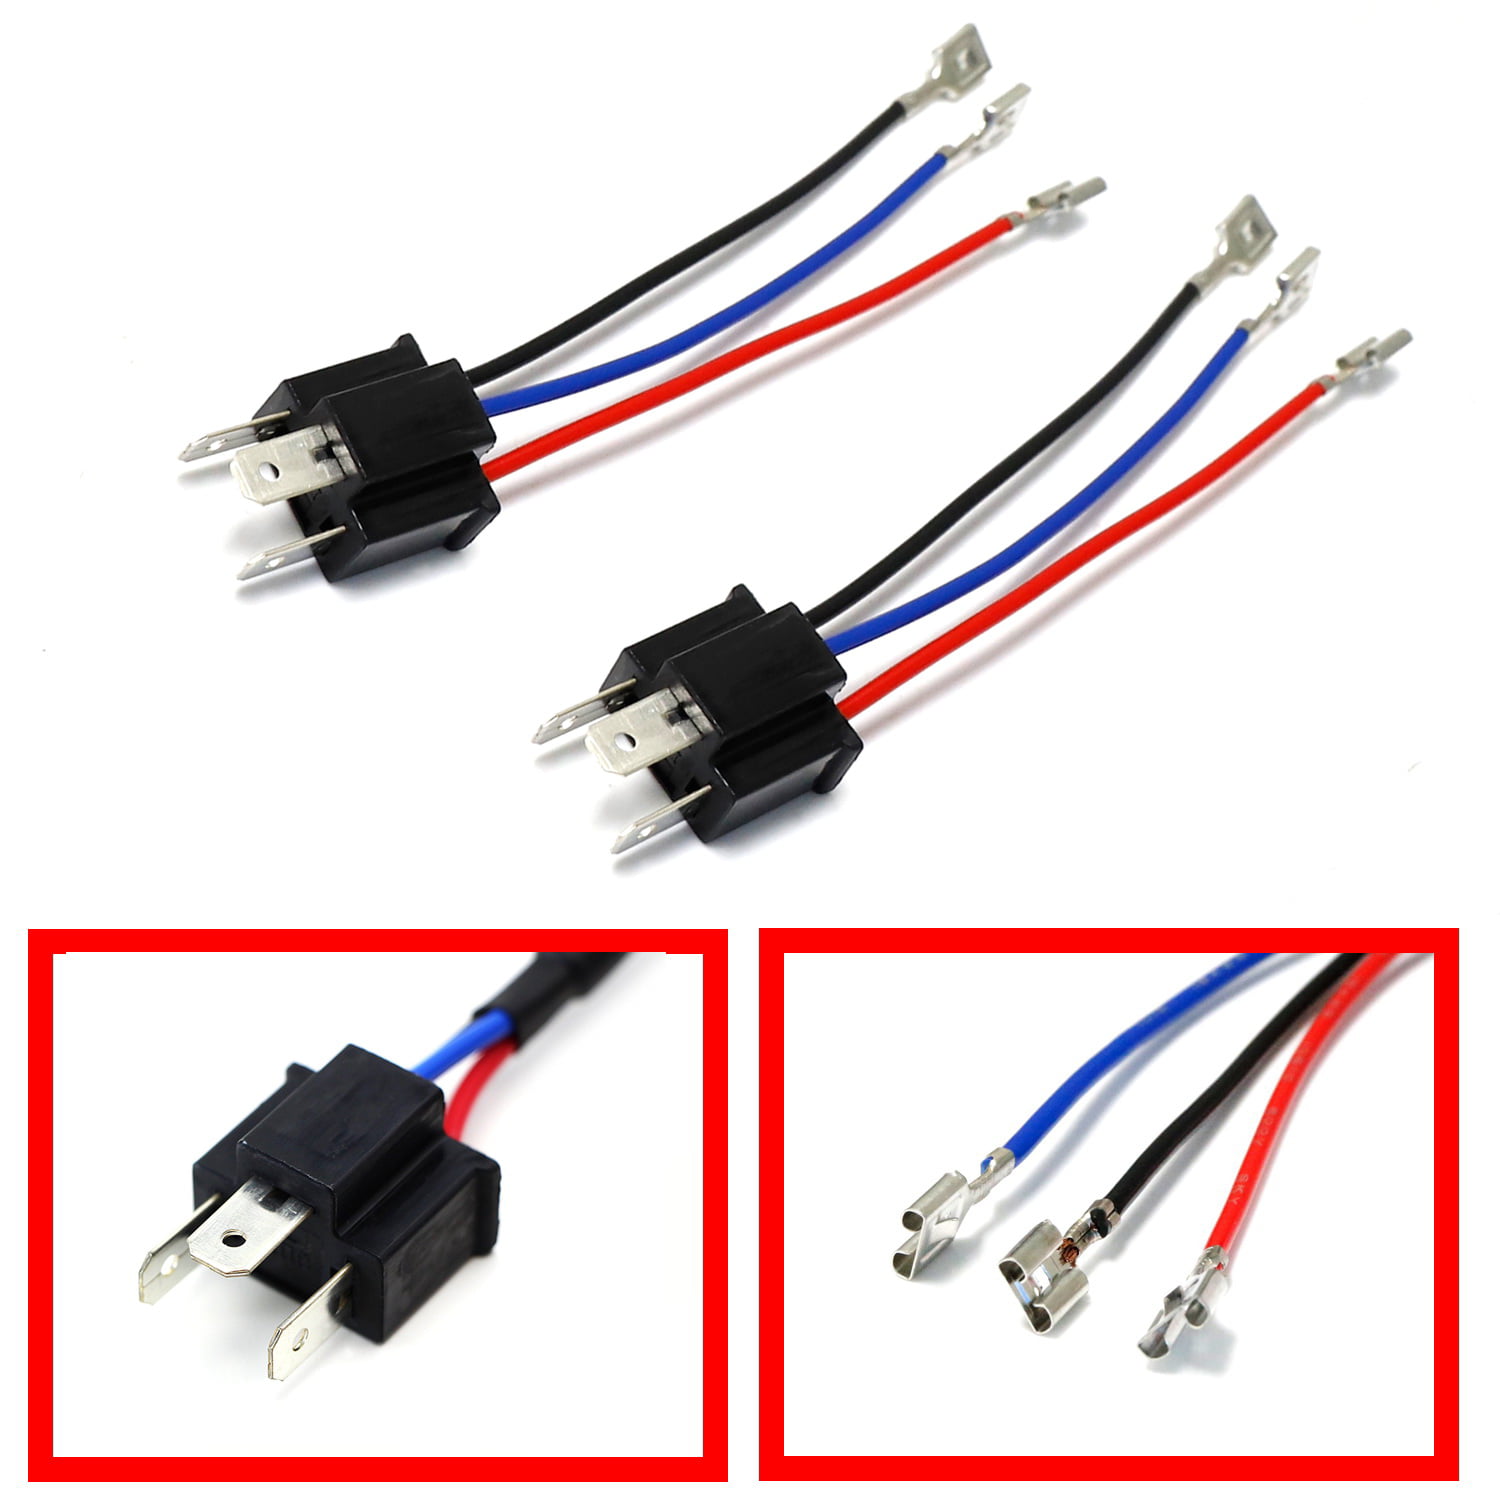 iJDMTOY H4 9003 To H13 9008 Pigtail Wire Wiring Harness Adapters For H4/H13 Headlight Conversion Retrofit 2